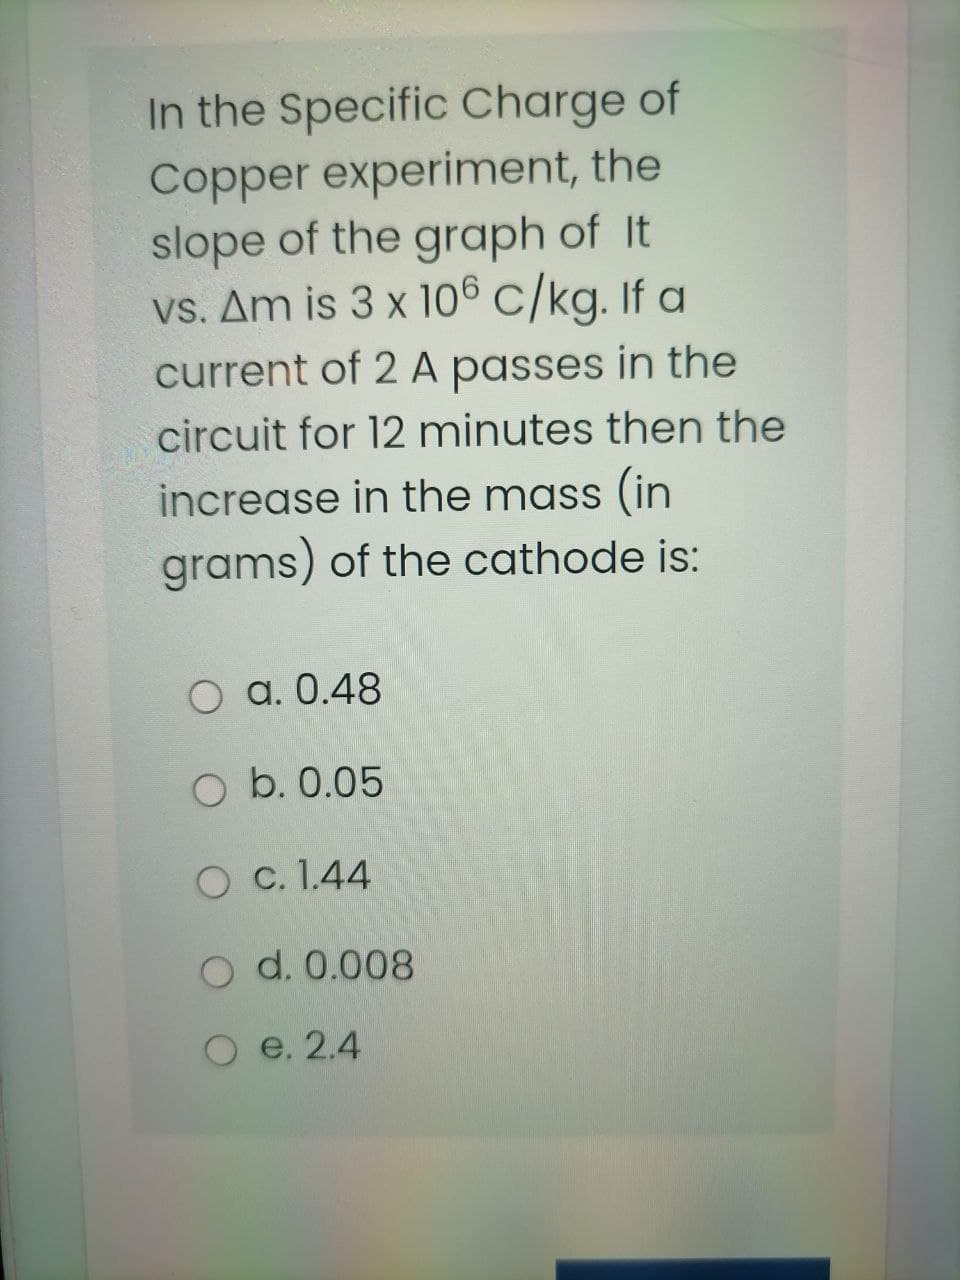 In the Specific Charge of
Copper experiment, the
slope of the graph of It
vs. Am is 3 x 106 C/kg. If a
current of 2 A passes in the
circuit for 12 minutes then the
increase in the mass (in
grams) of the cathode is:
O a. 0.48
O b. 0.05
O c. 1.44
O d. 0.008
e. 2.4
